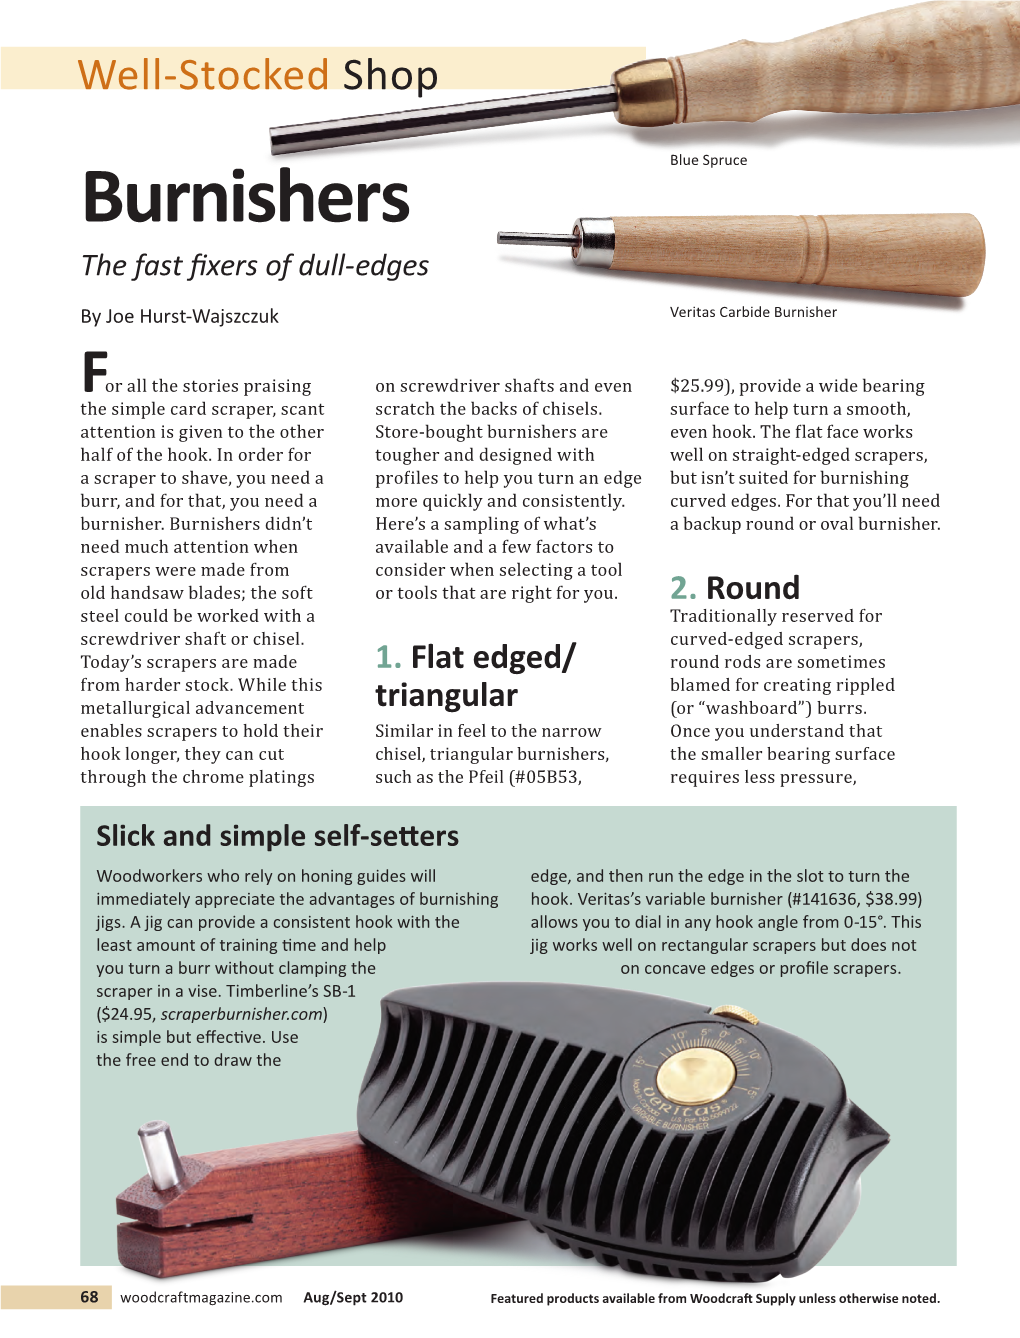 Burnishers the Fast Fixers of Dull-Edges